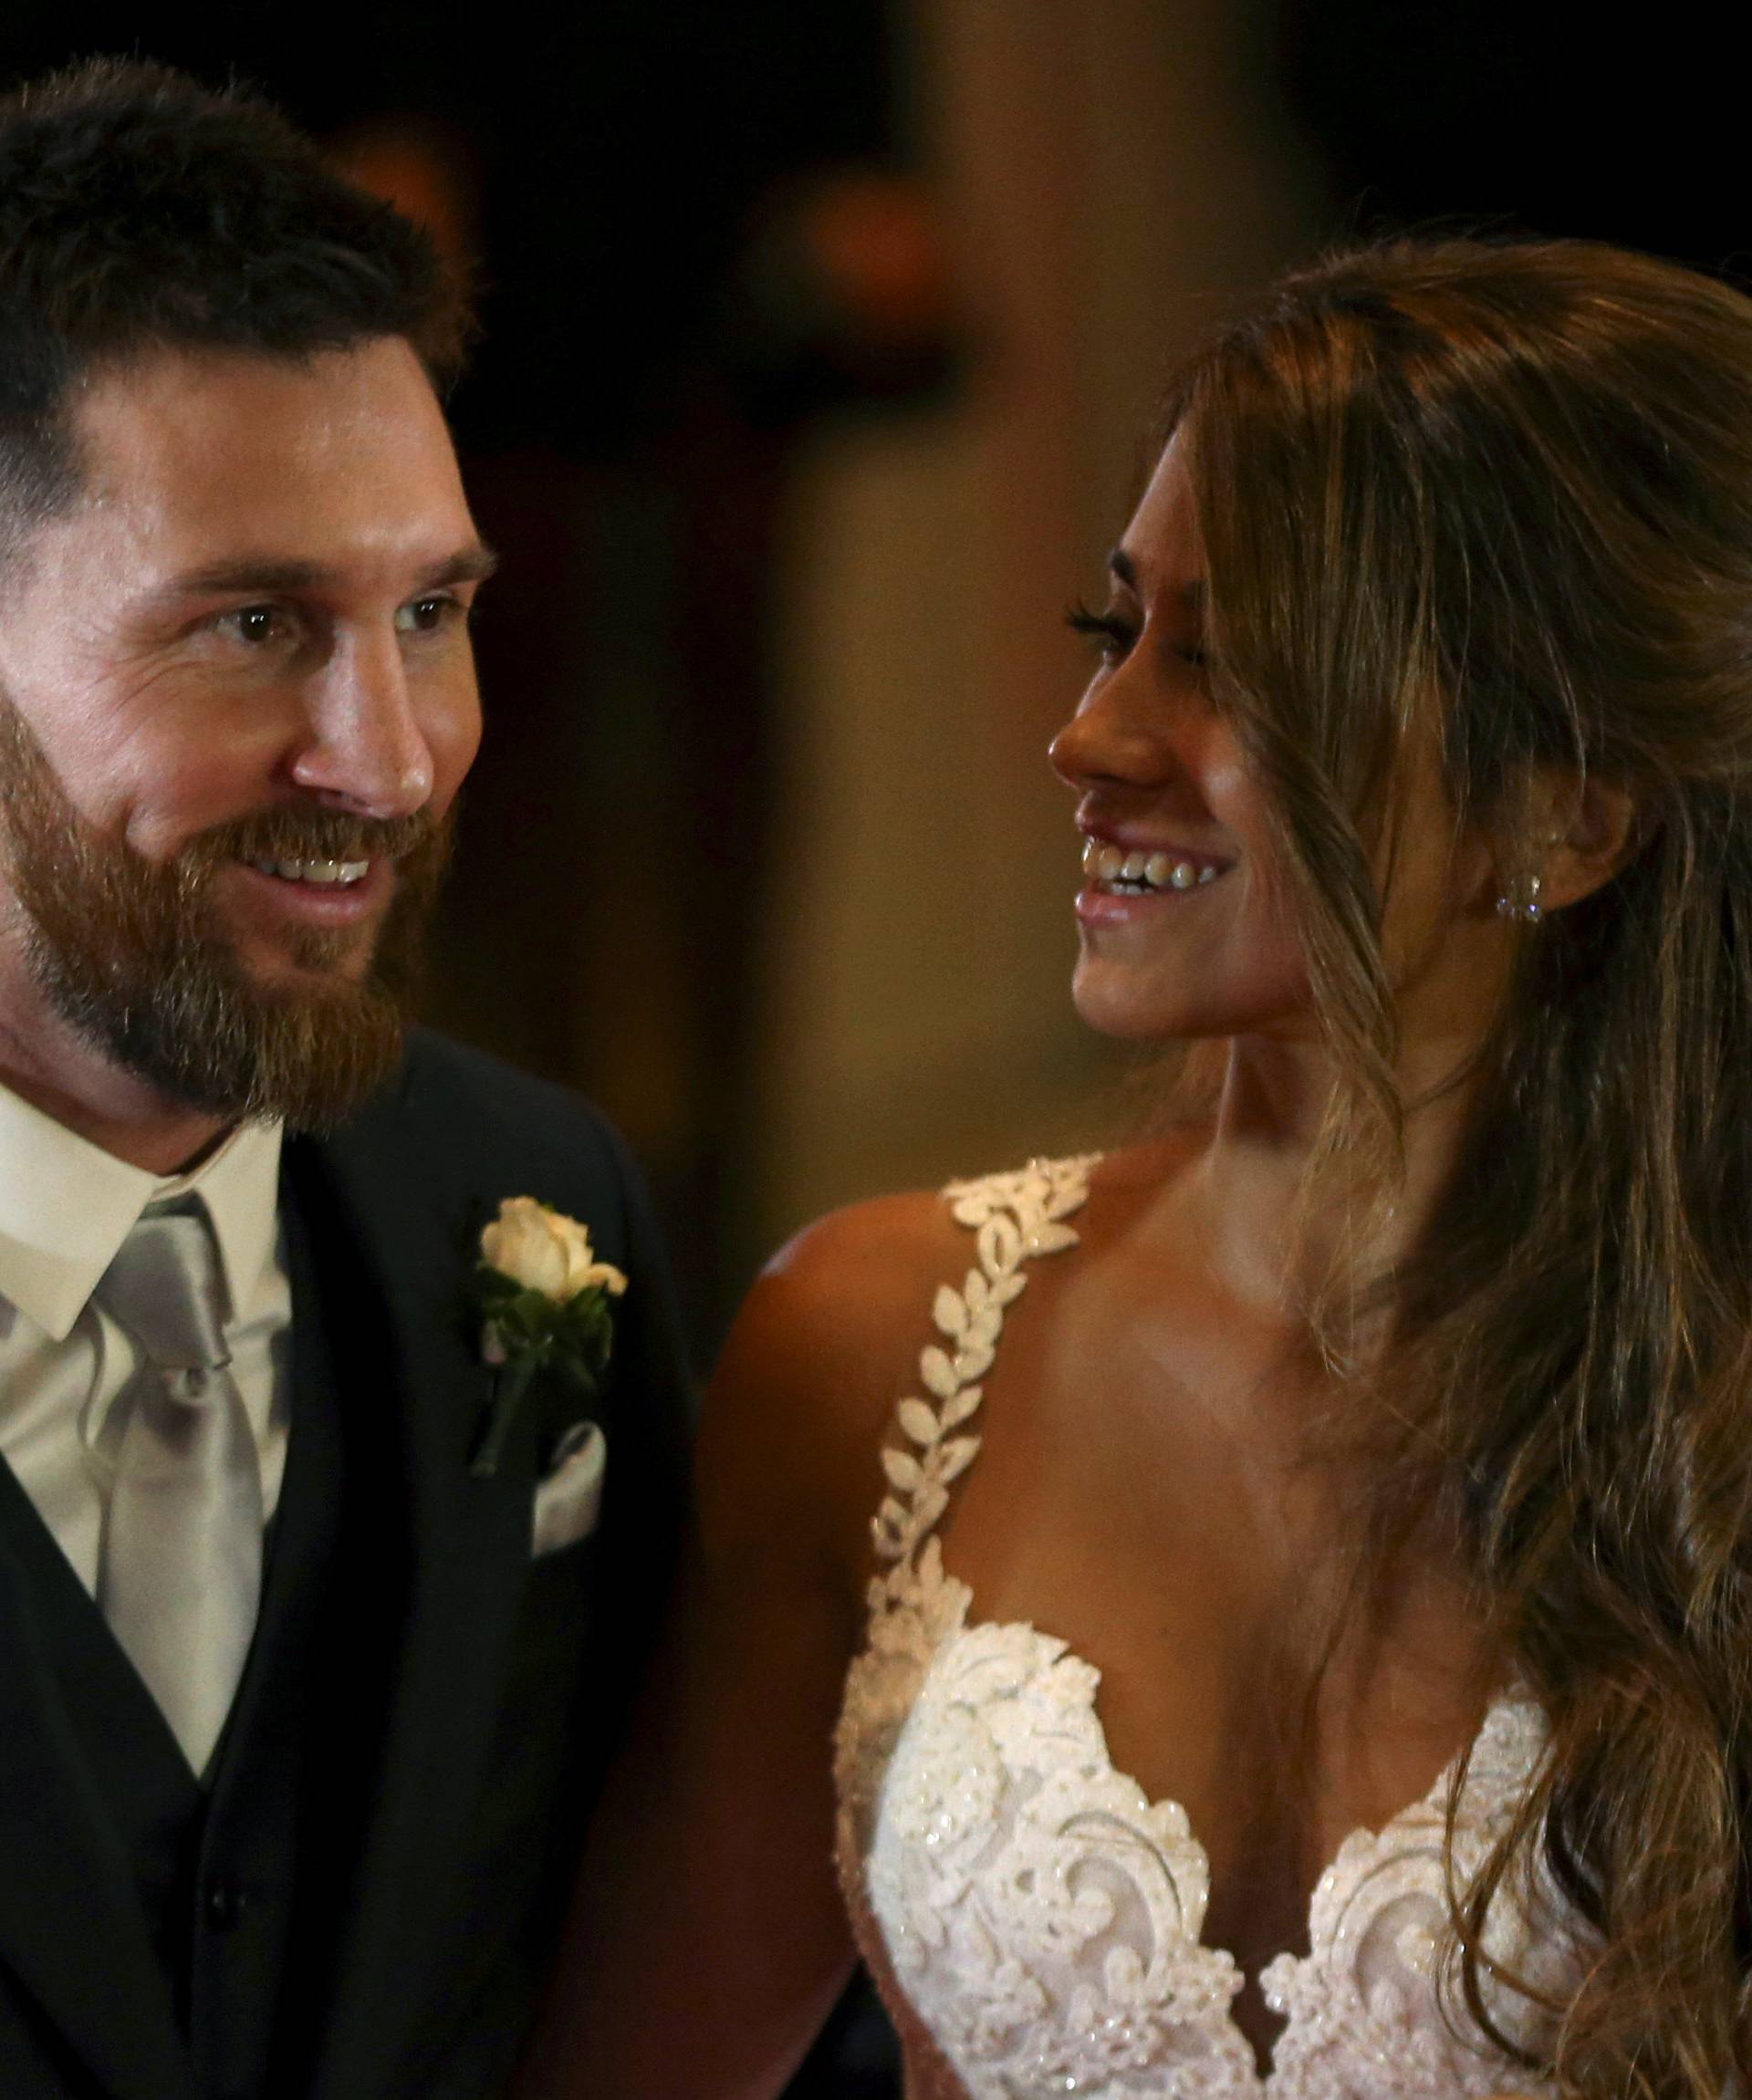 Argentine soccer player Lionel Messi and his wife Antonela Roccuzzo pose at their wedding in Rosario, Argentina